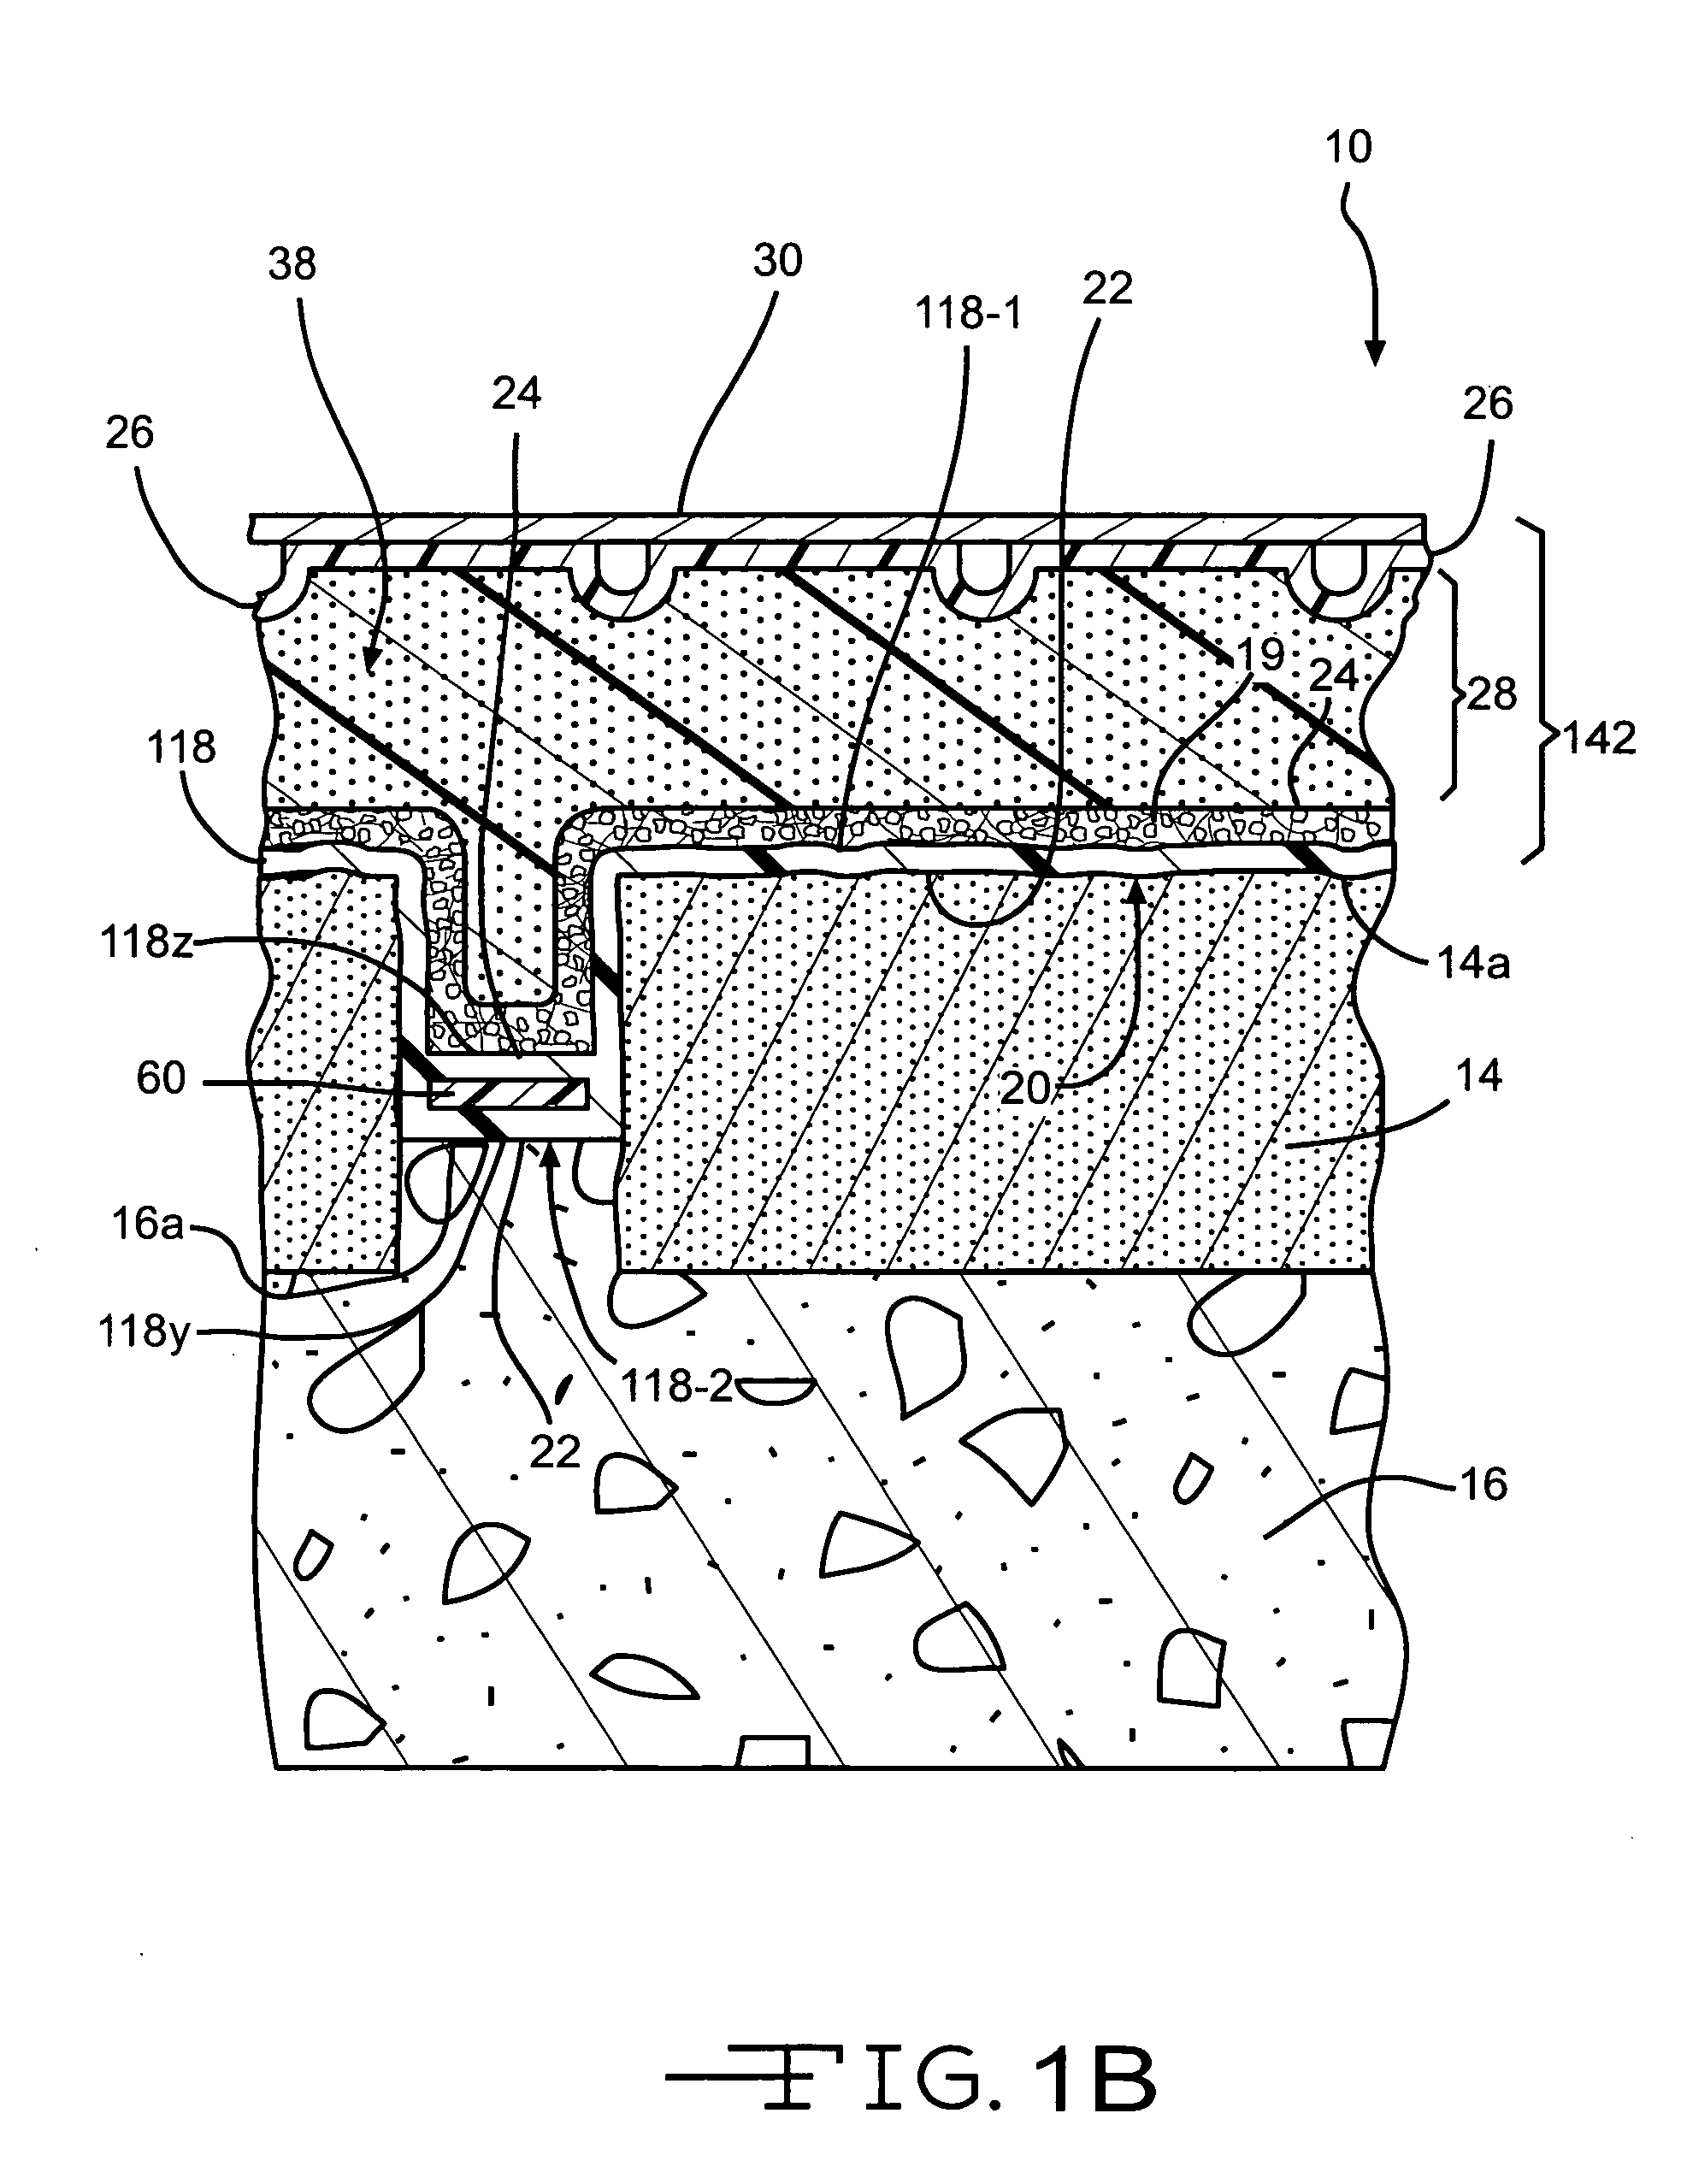 Mold and method for manufacturing a simulated stone product